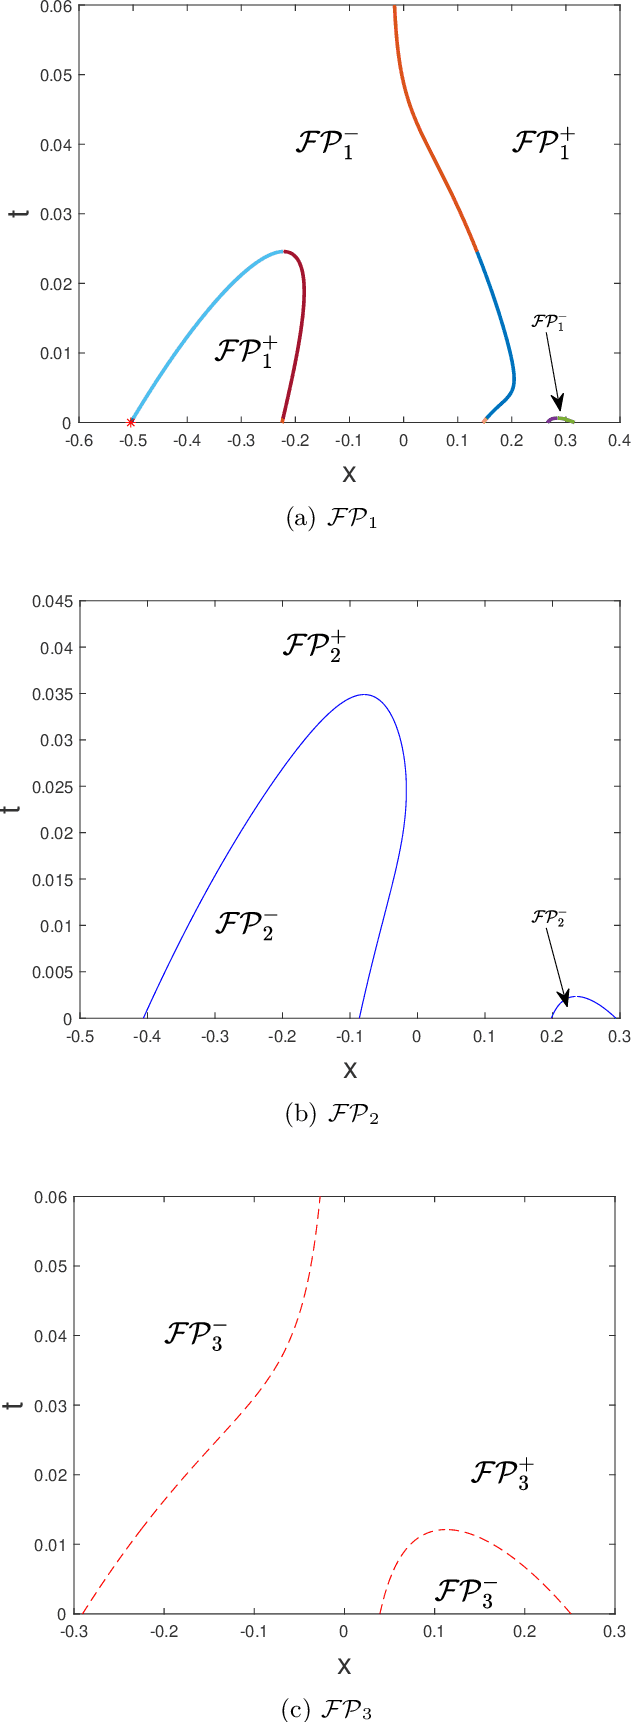 Figure 4 for Yuille-Poggio's Flow and Global Minimizer of polynomials through convexification by Heat Evolution